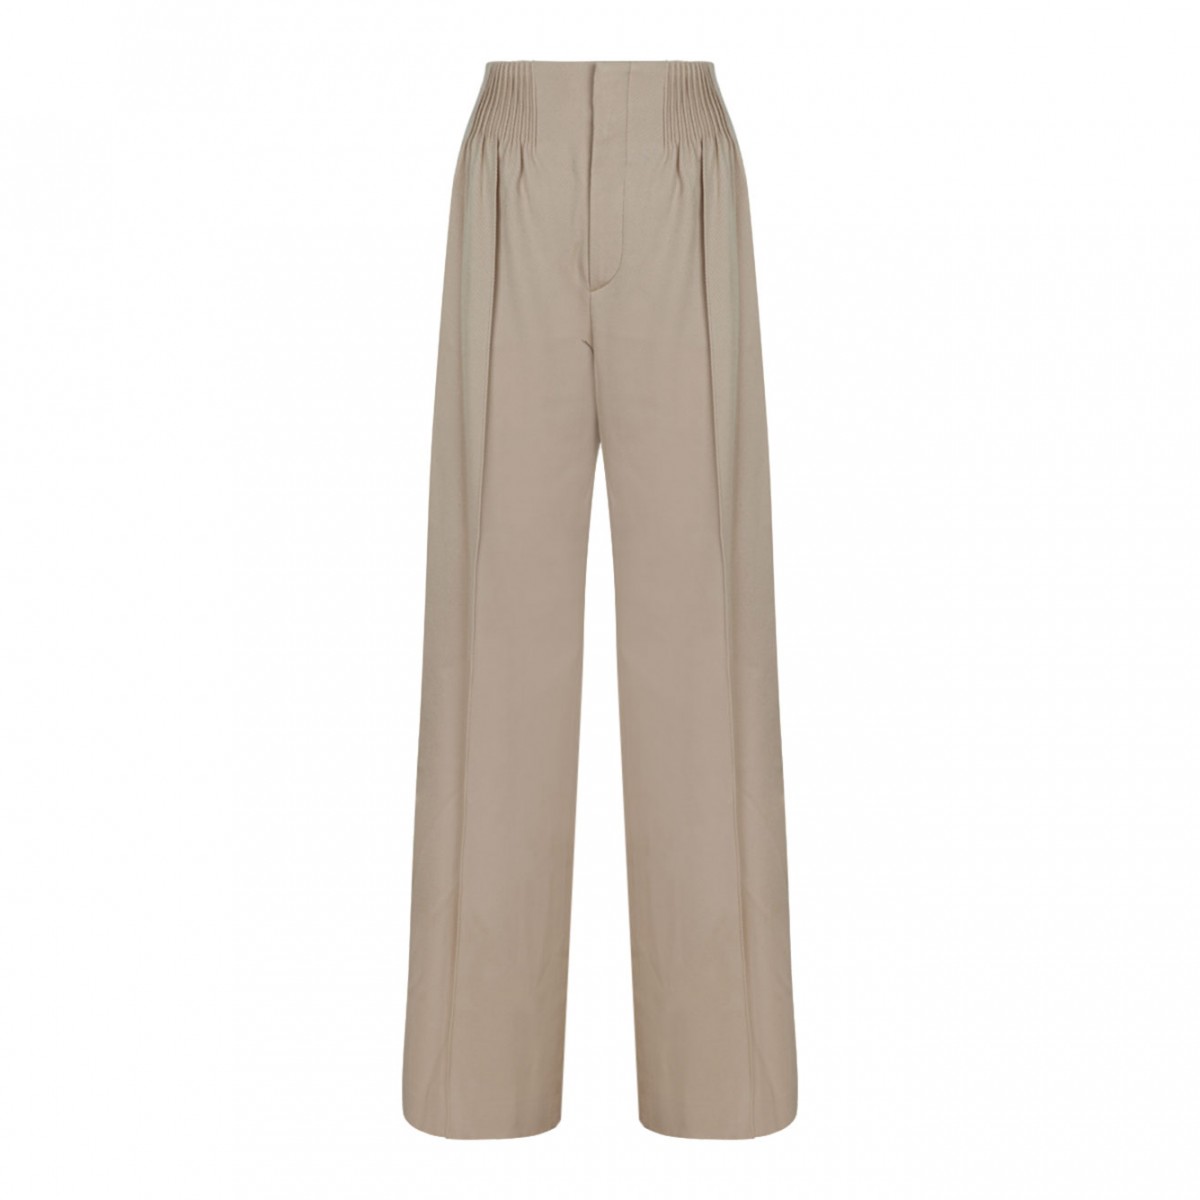 High Waisted Pearl Beige Sartorial Trousers